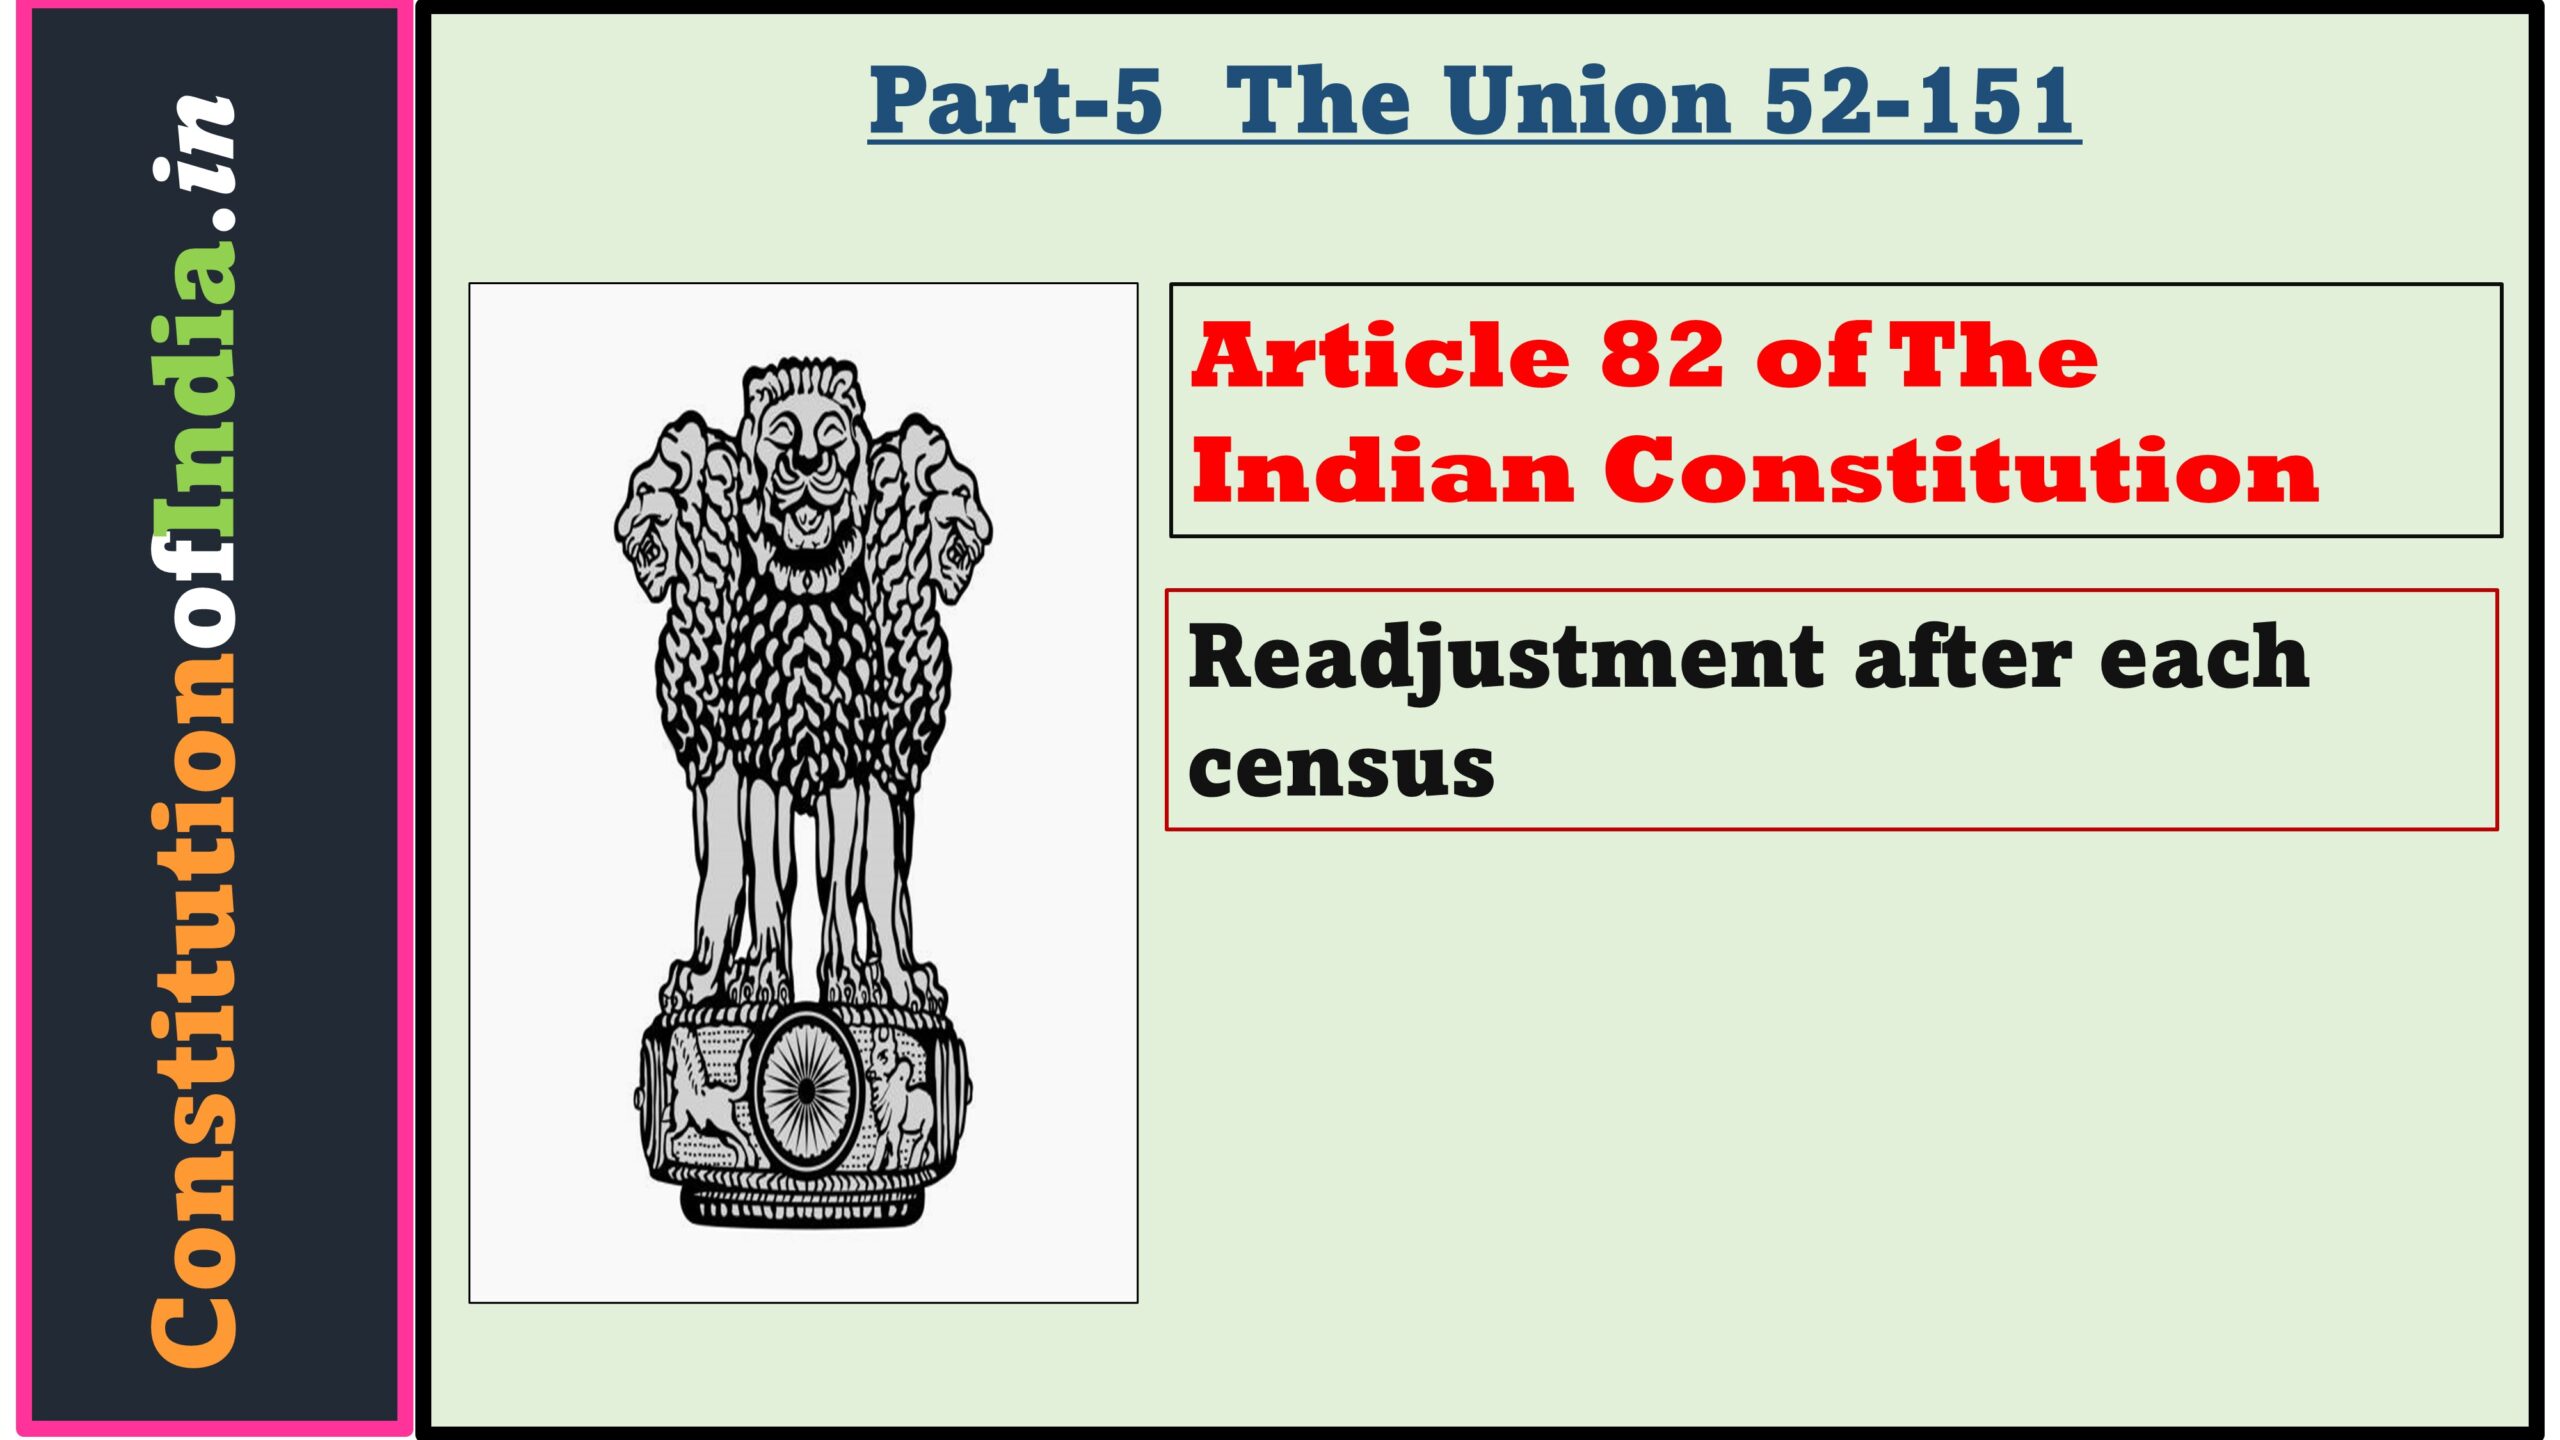 Article 82 of The Indian Constitution